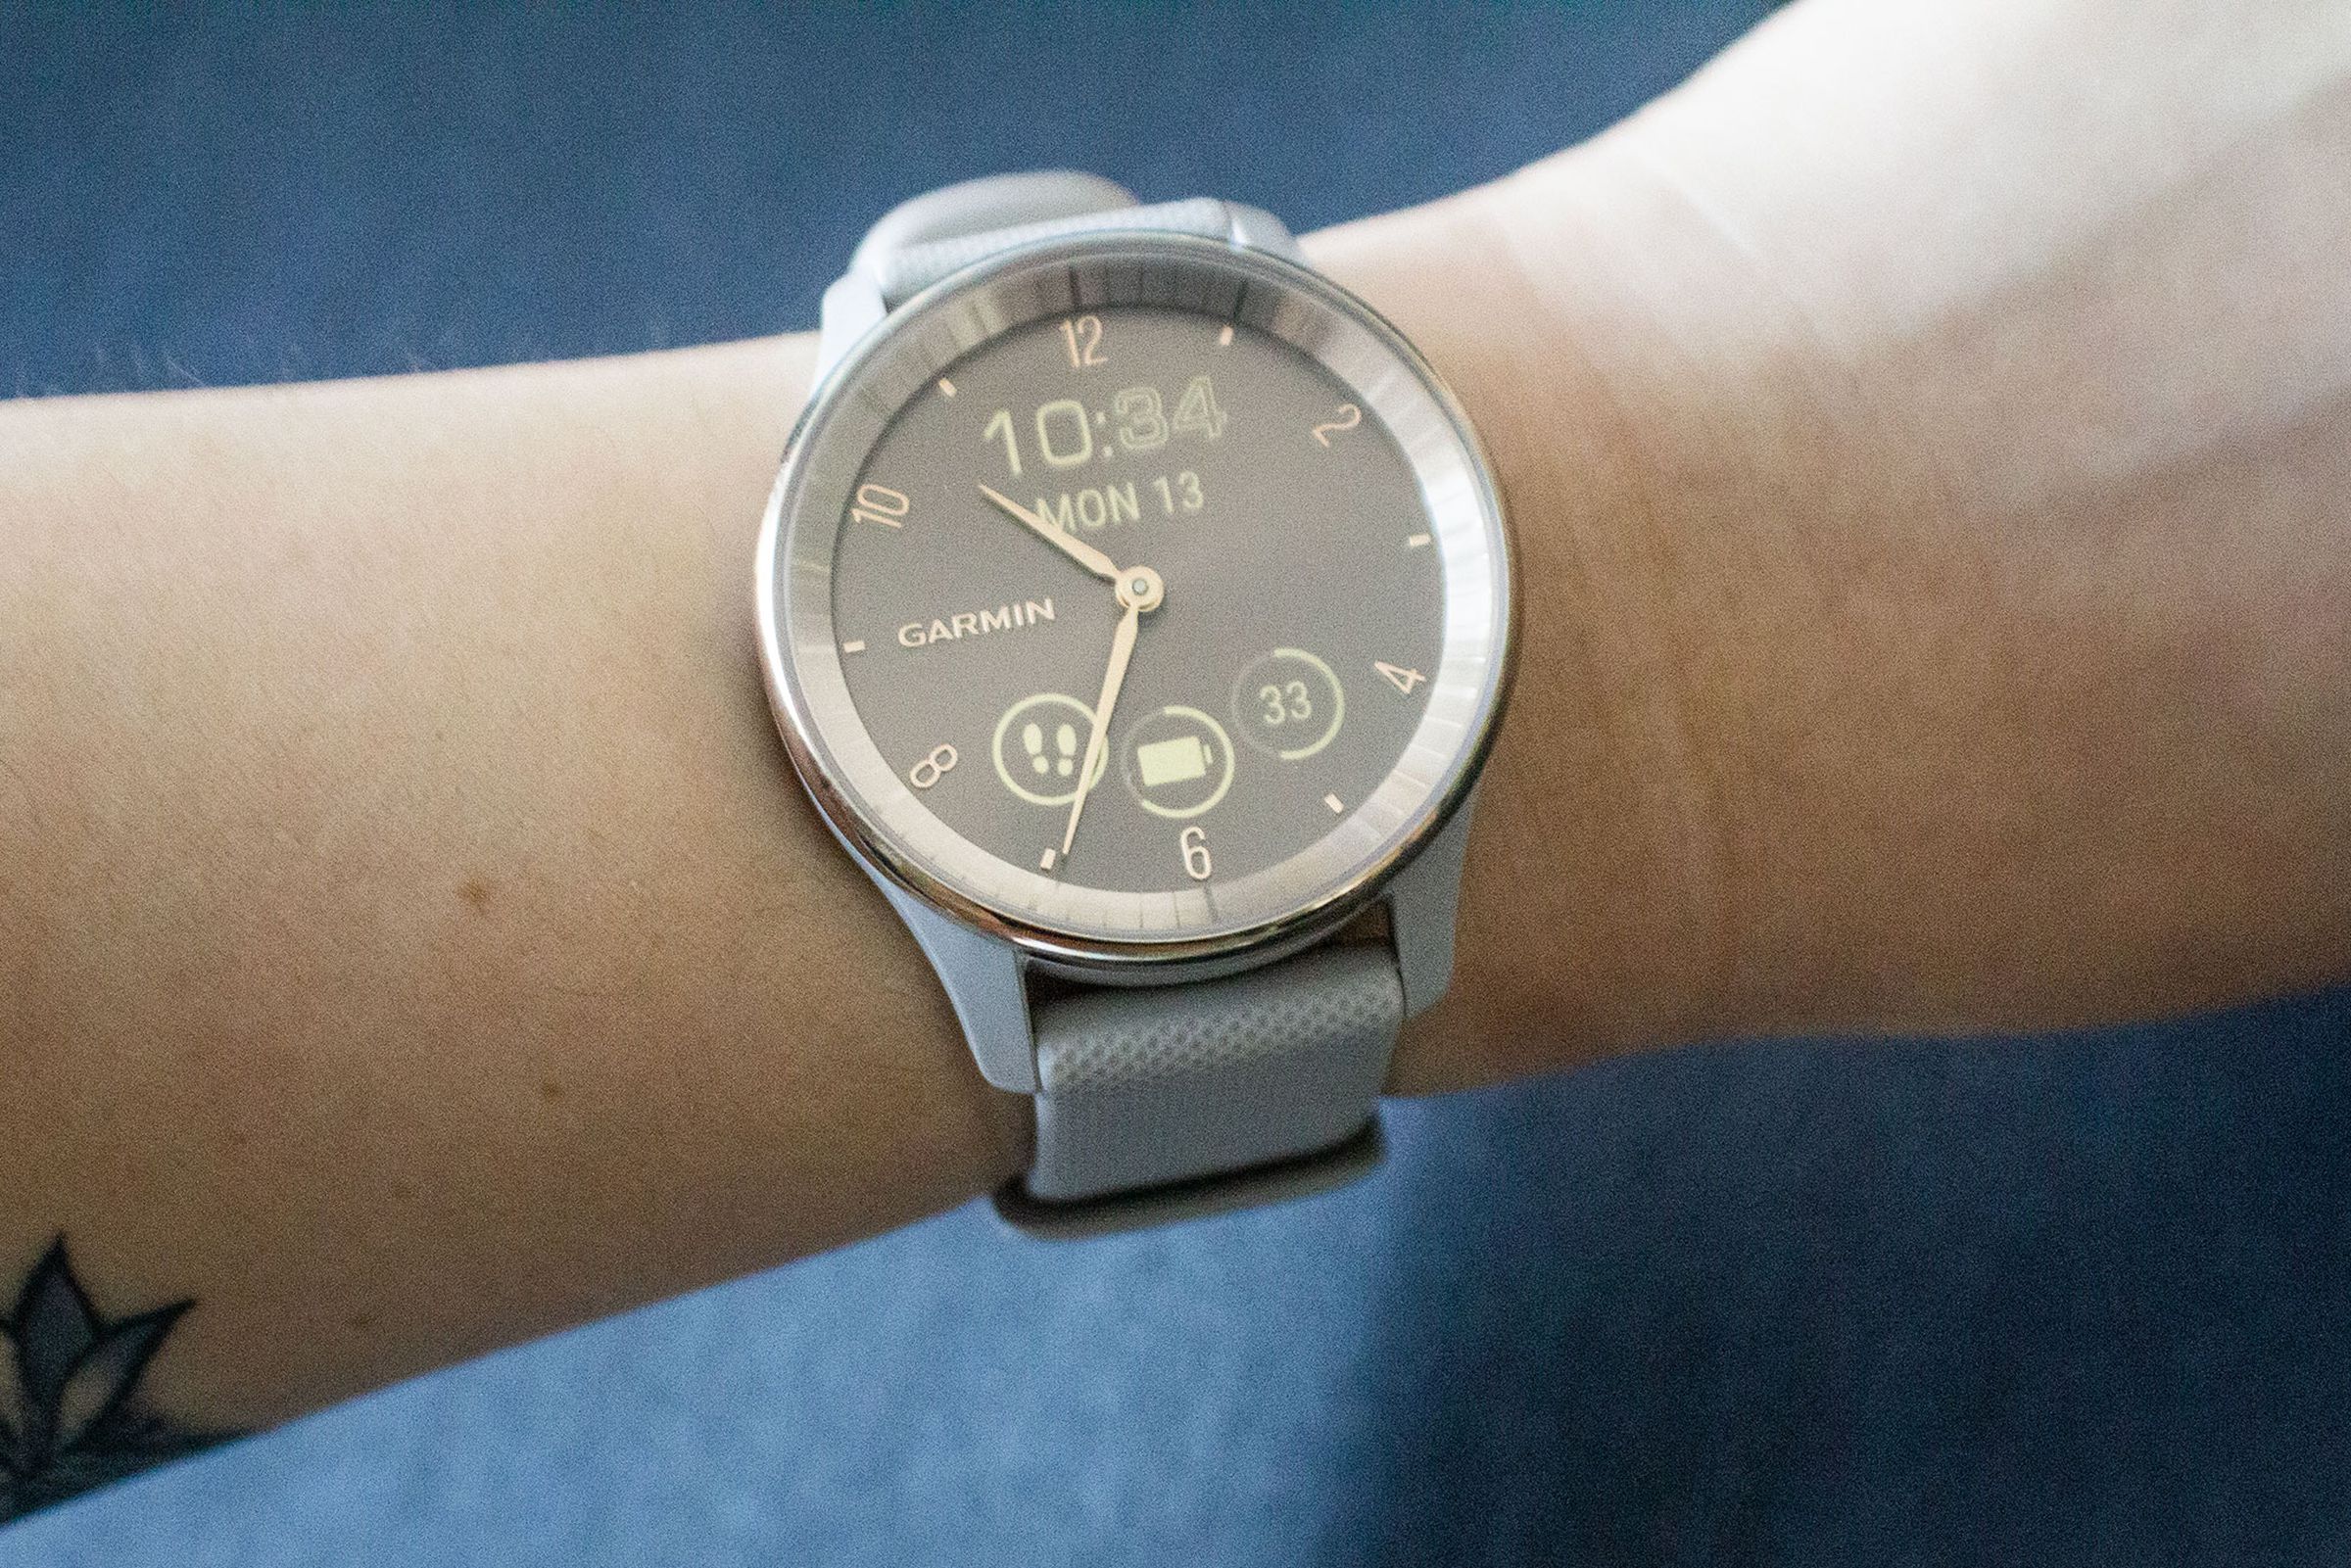 Shot of Garmin Vivomove Trend on a person’s watch with the hidden display visible.